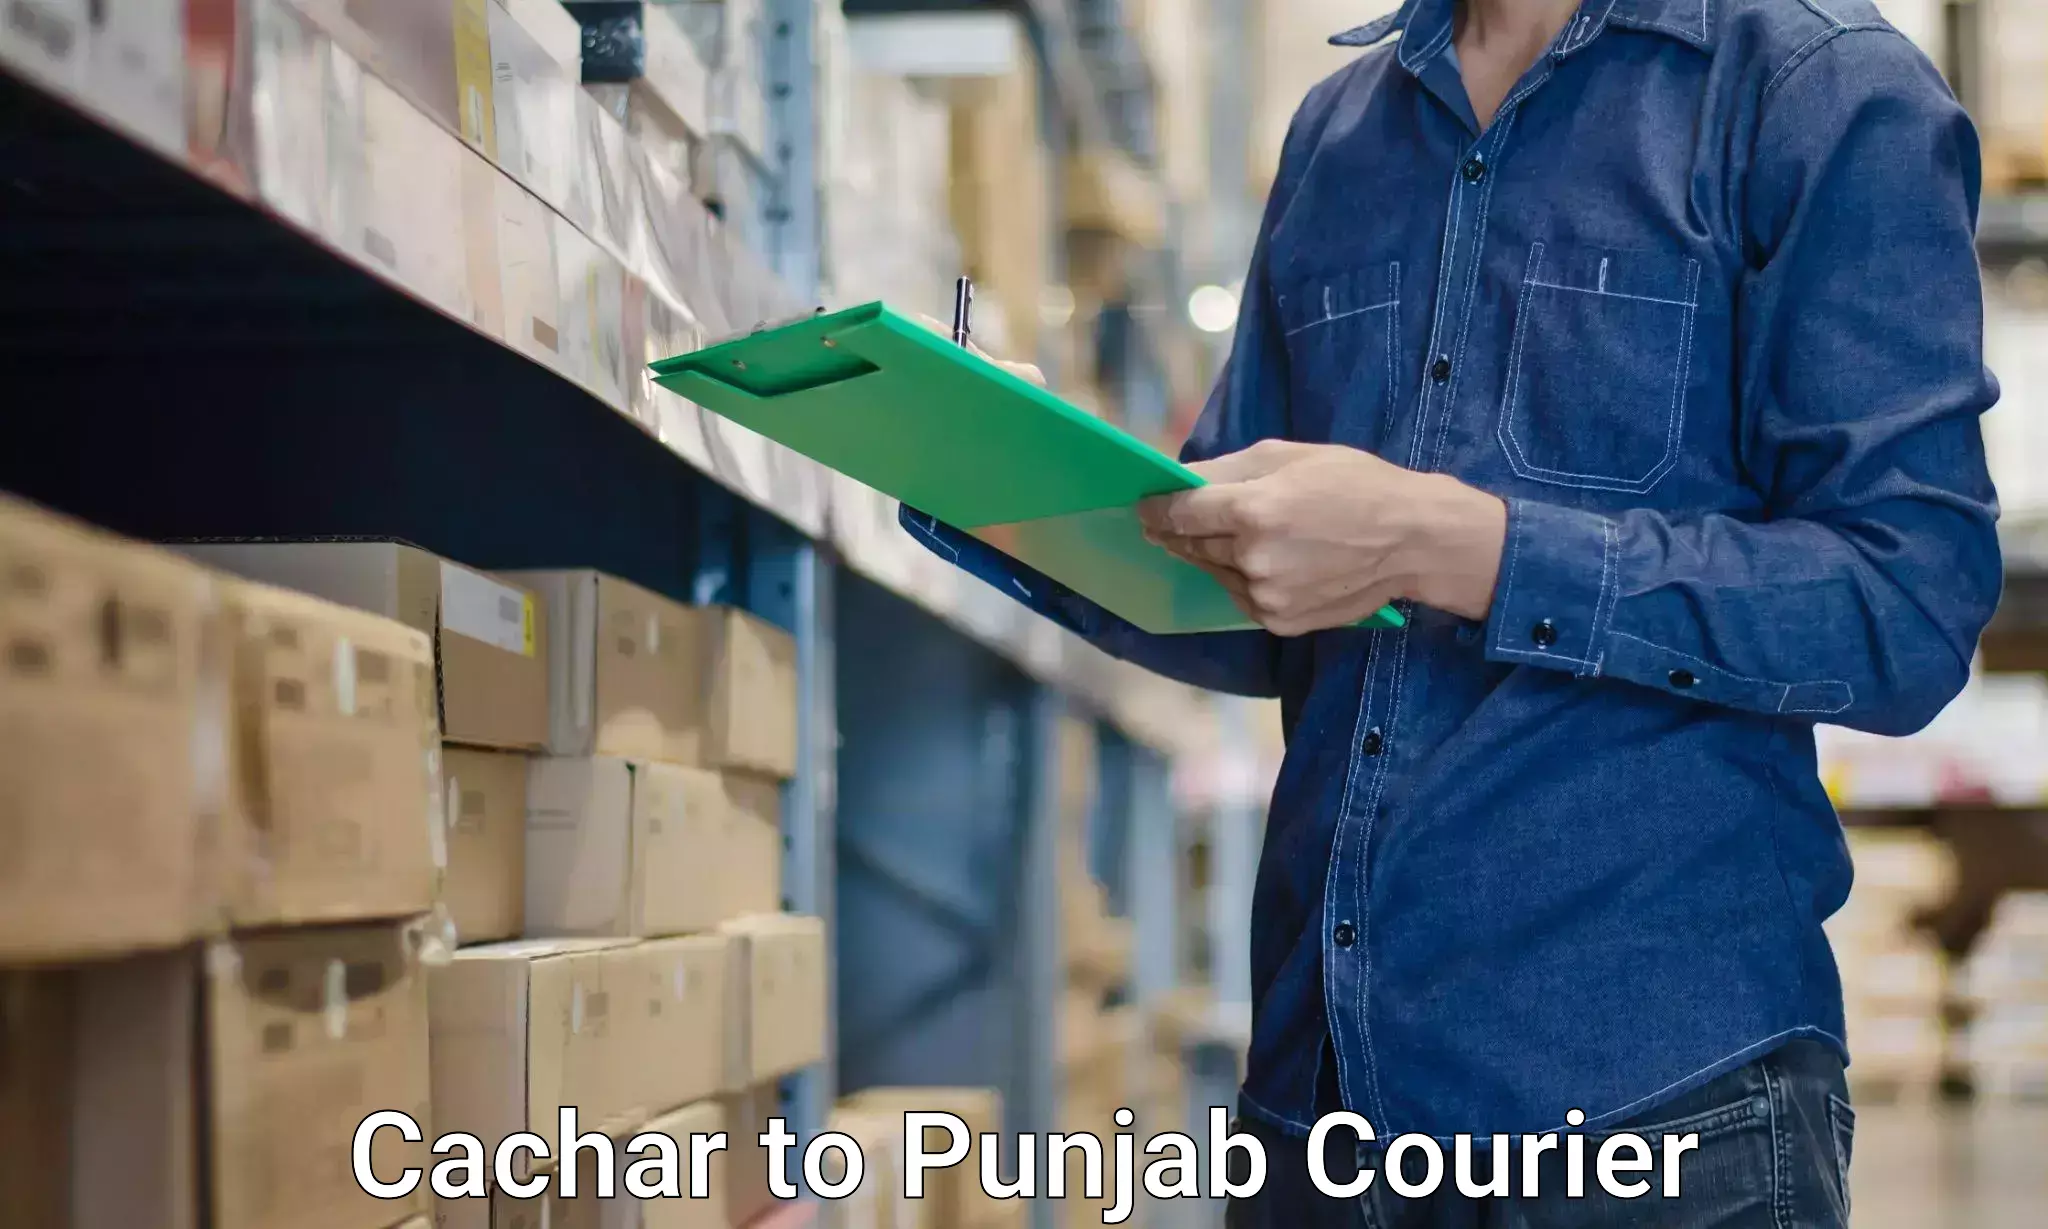 Furniture relocation experts Cachar to Talwandi Sabo